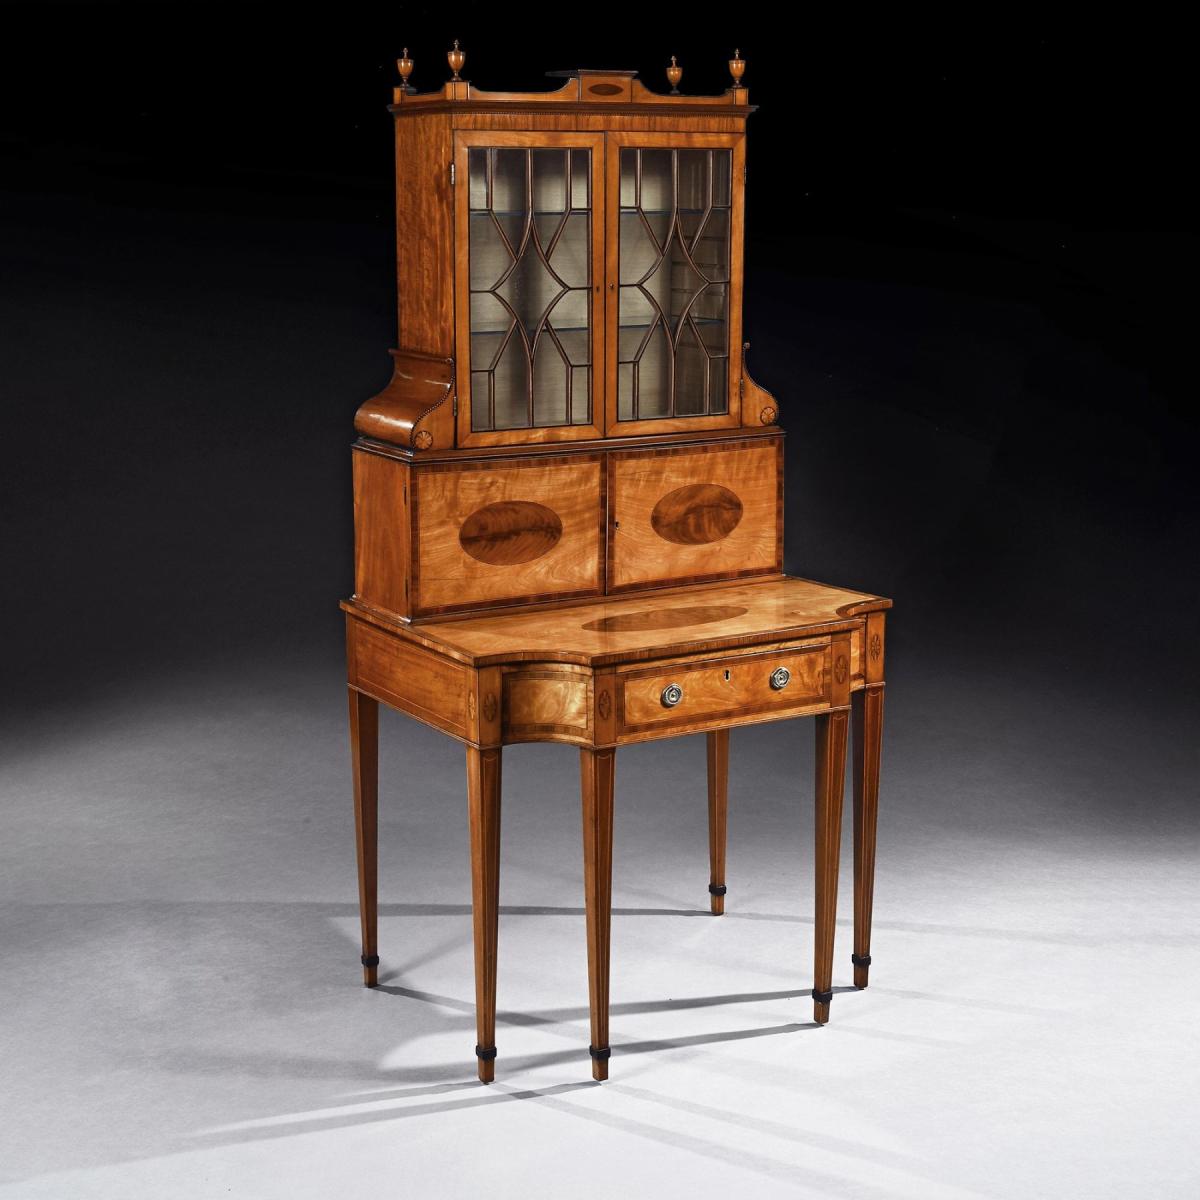 An Important 18th Century George III Satinwood and Sabicu Writing Cabinet